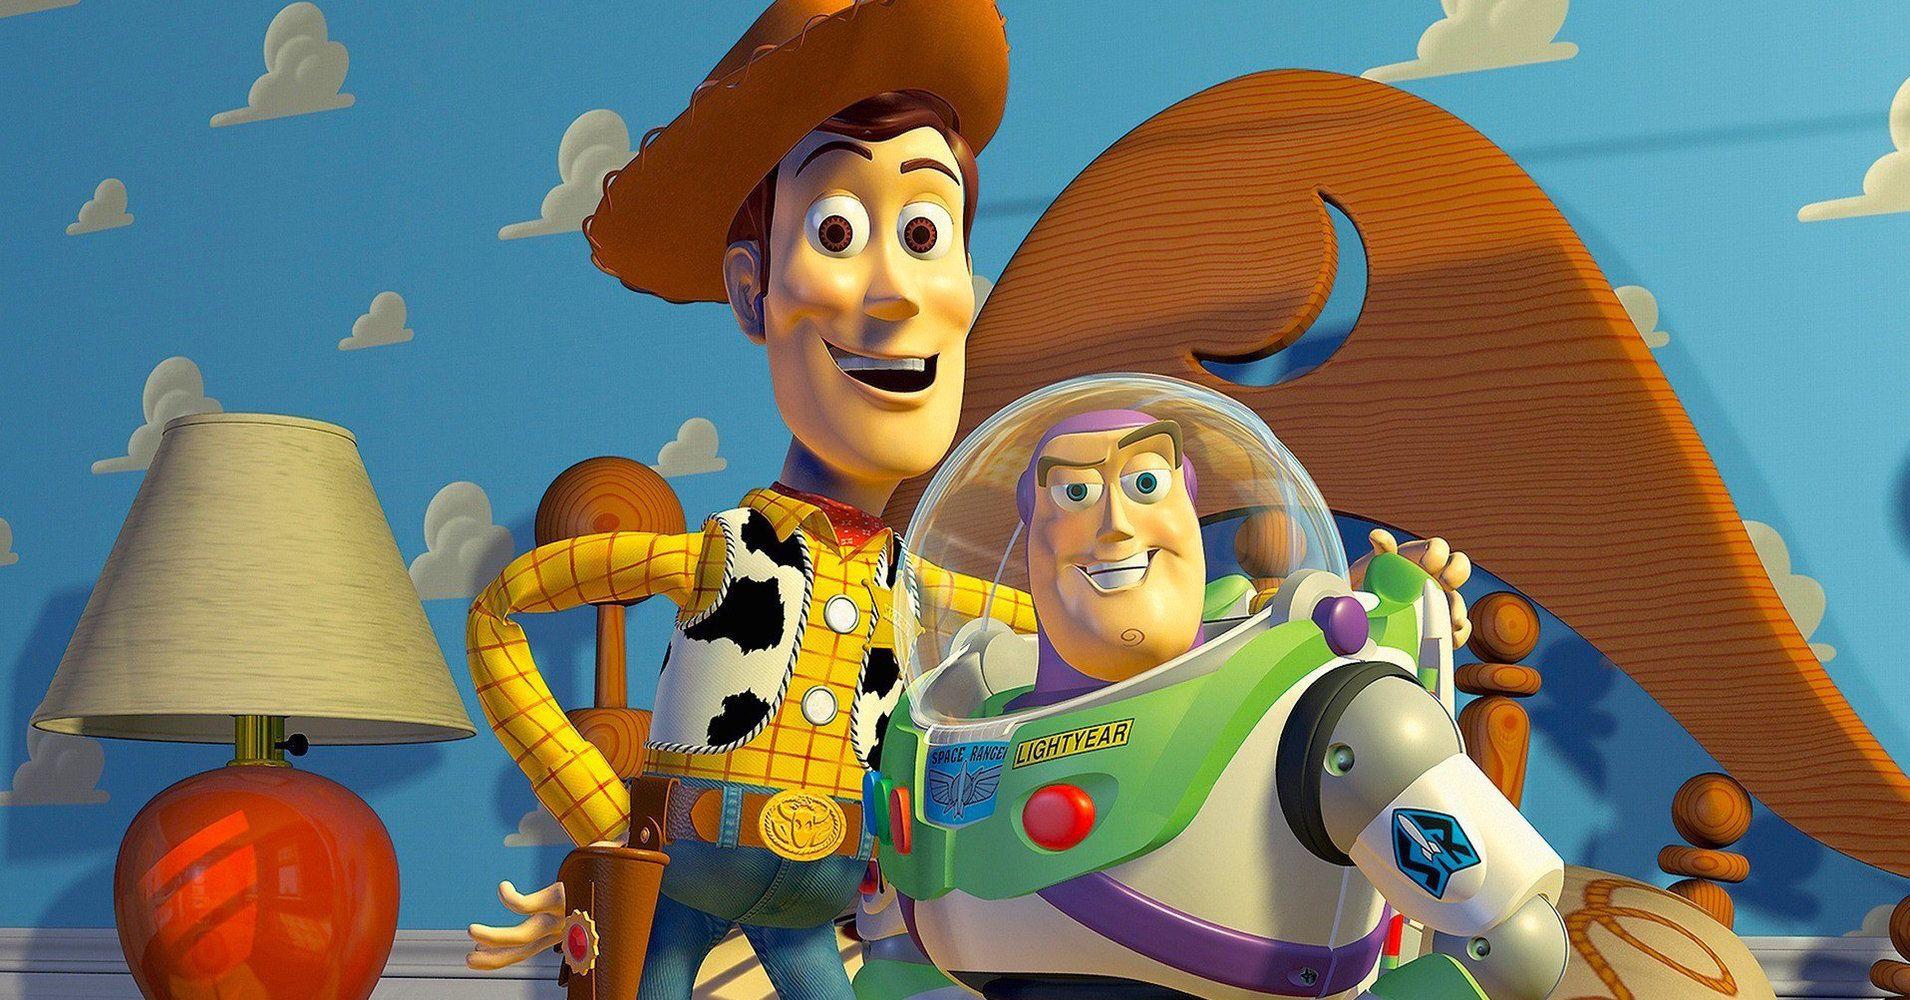 'Toy Story' Secrets That Will Toy With Your Head